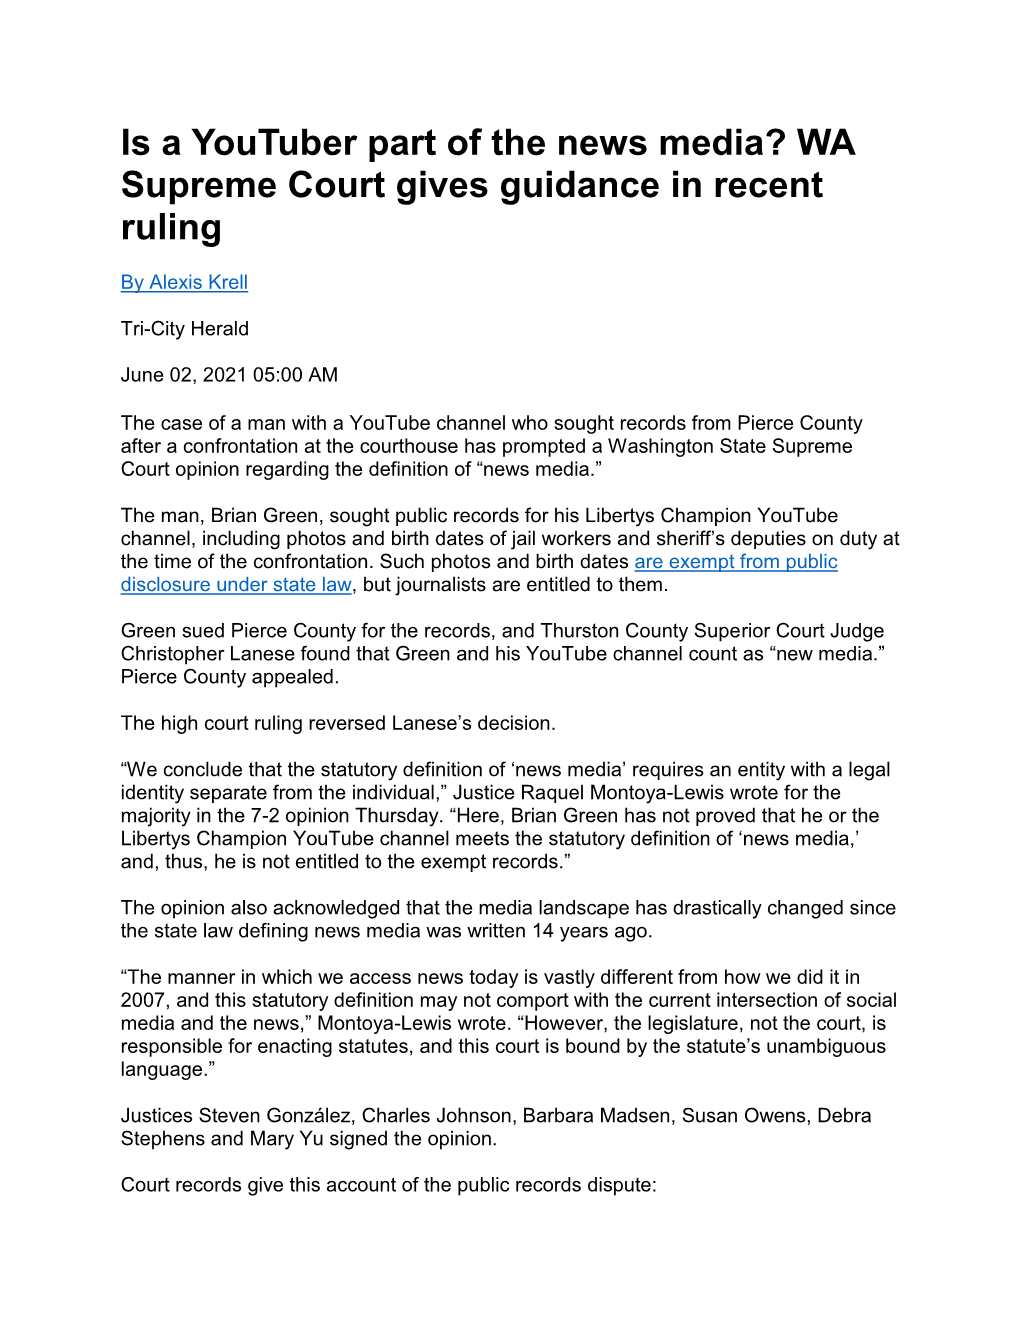 Is a Youtuber Part of the News Media? WA Supreme Court Gives Guidance in Recent Ruling